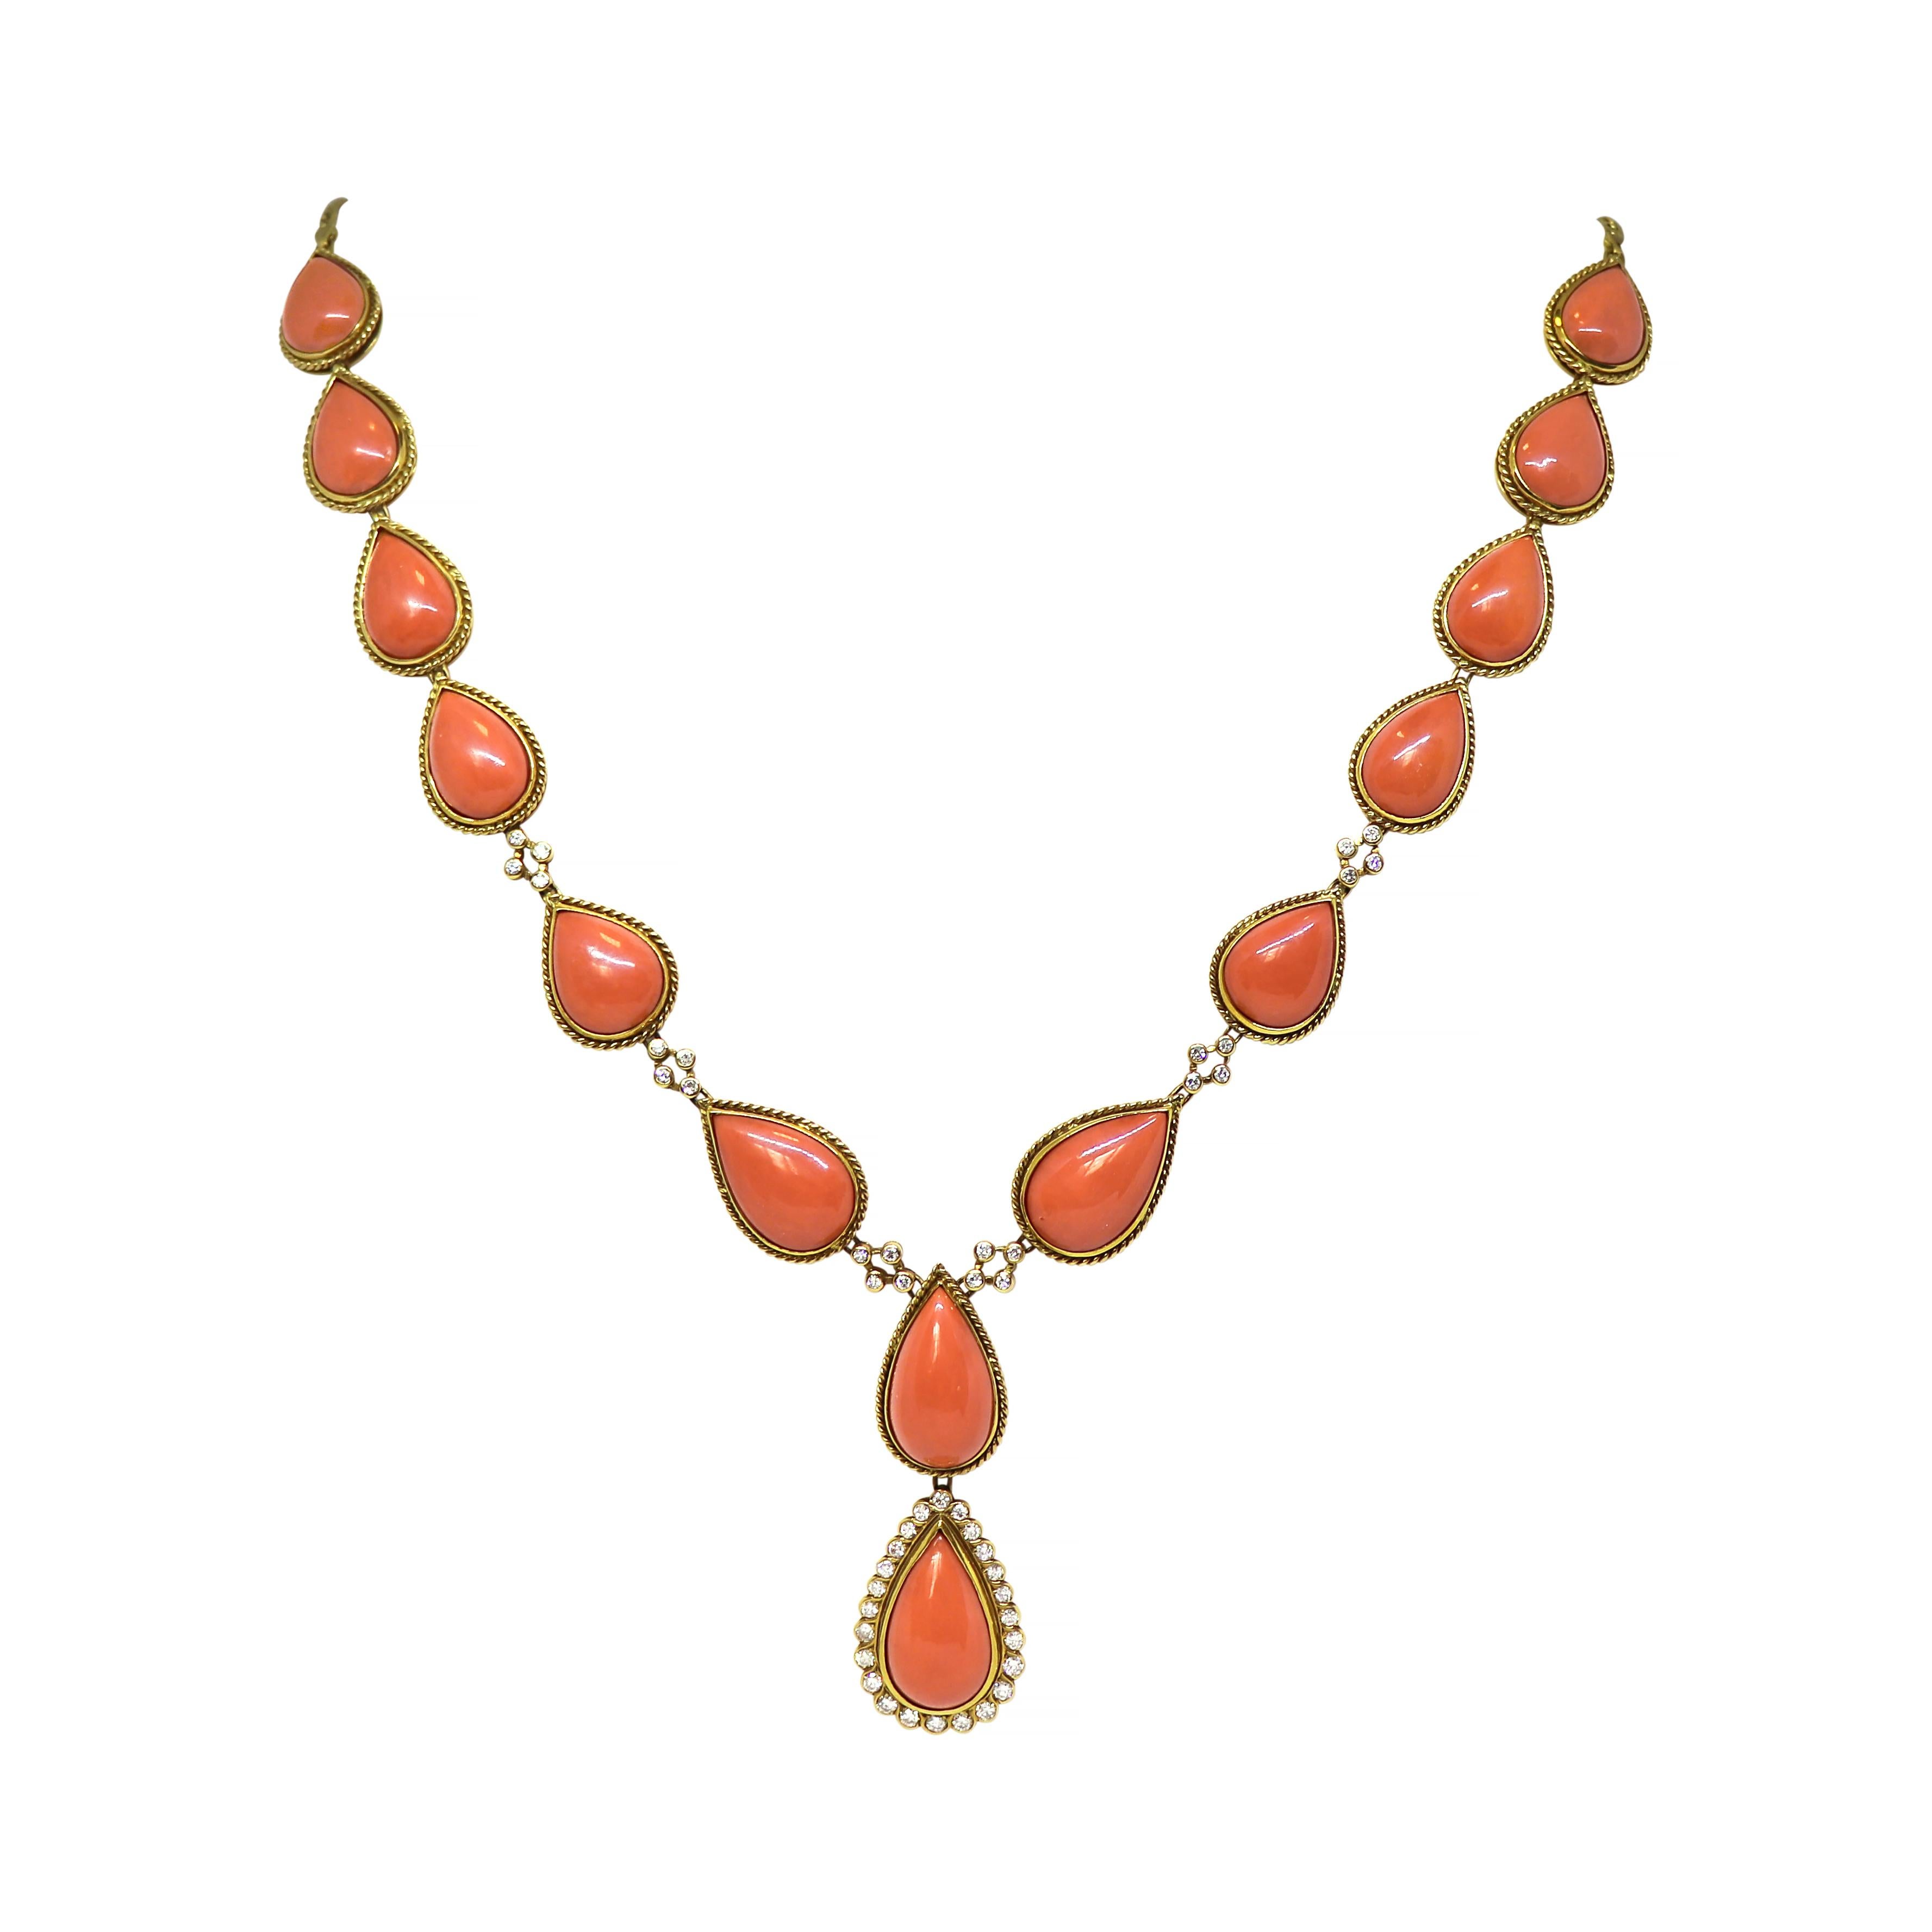 This handmade vintage necklace is made up of 14 pear shaped coral sections rubover set in 18 carat yellow gold with a fine rope design, connected to a solid flat curb chain. The lower half of the necklace is beautifully designed with 4 rubover set